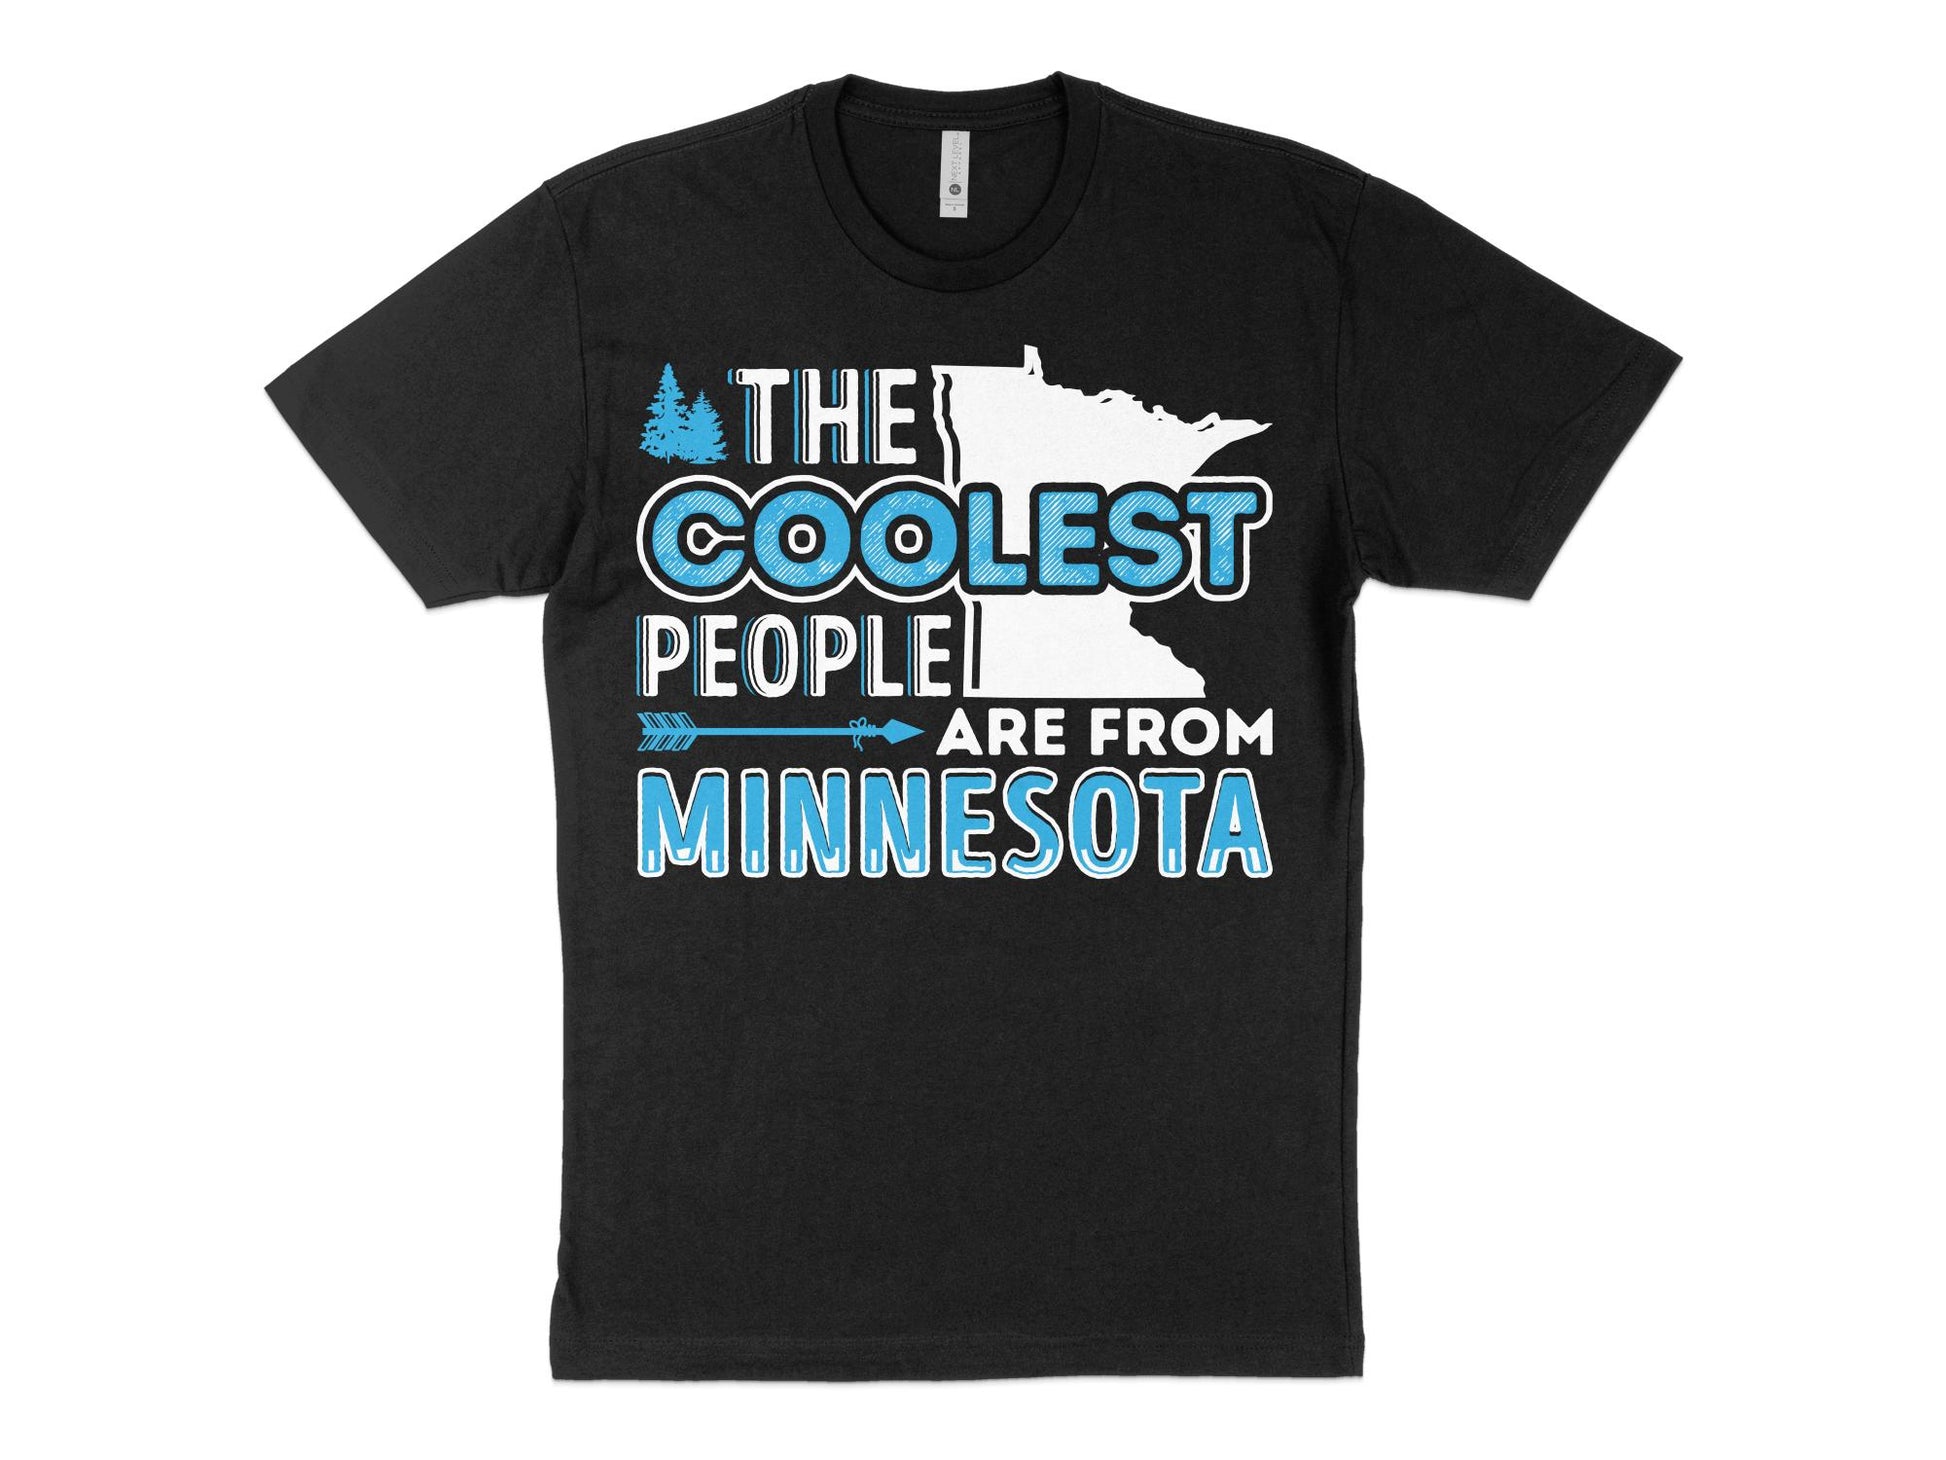 Minnesota T Shirt - The Coolest People Are From Minnesota, black